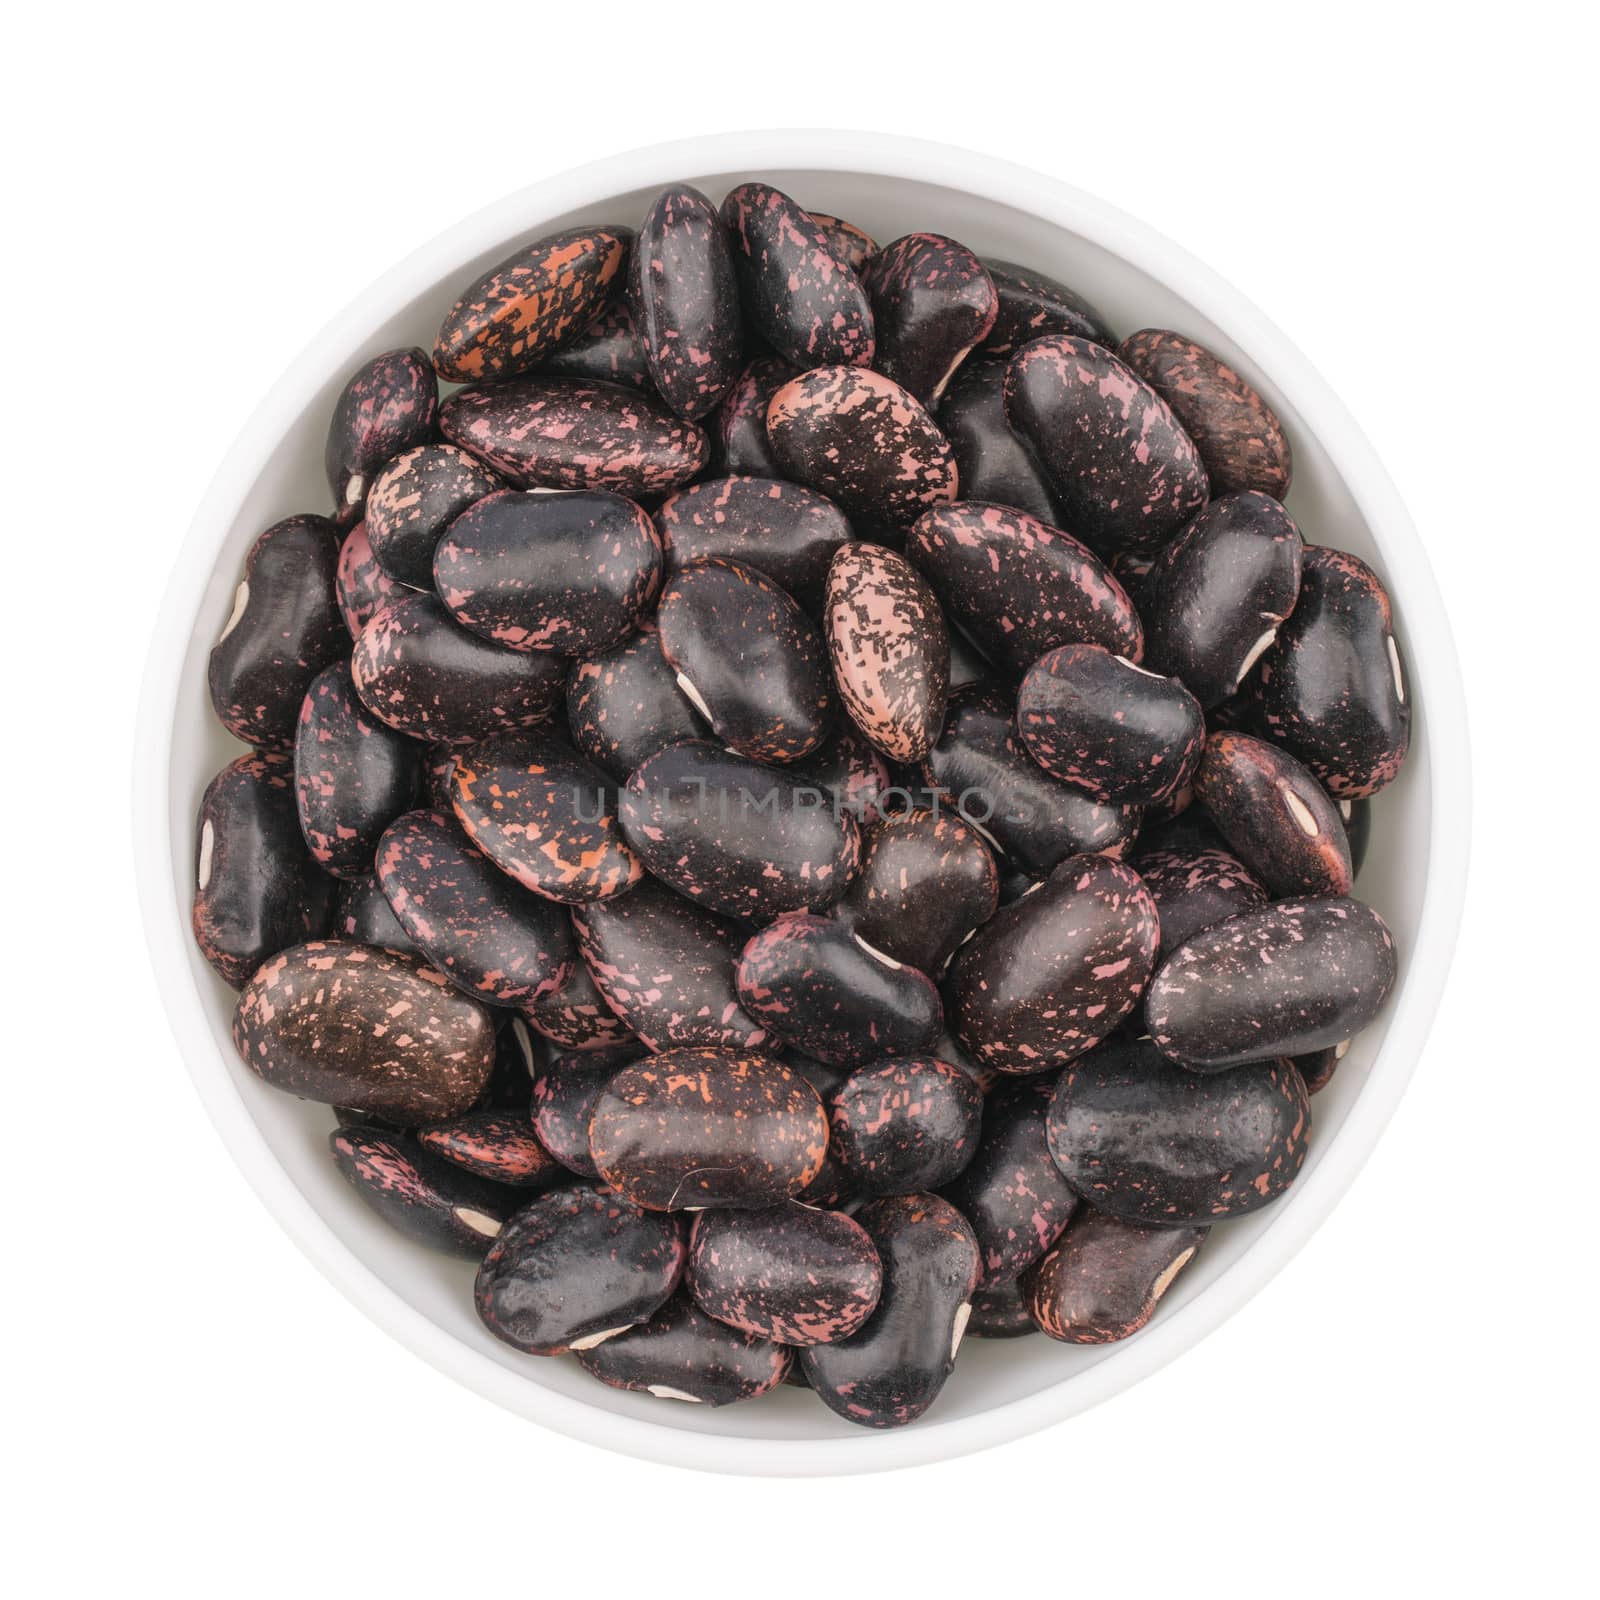 dried beans in bowl on white background